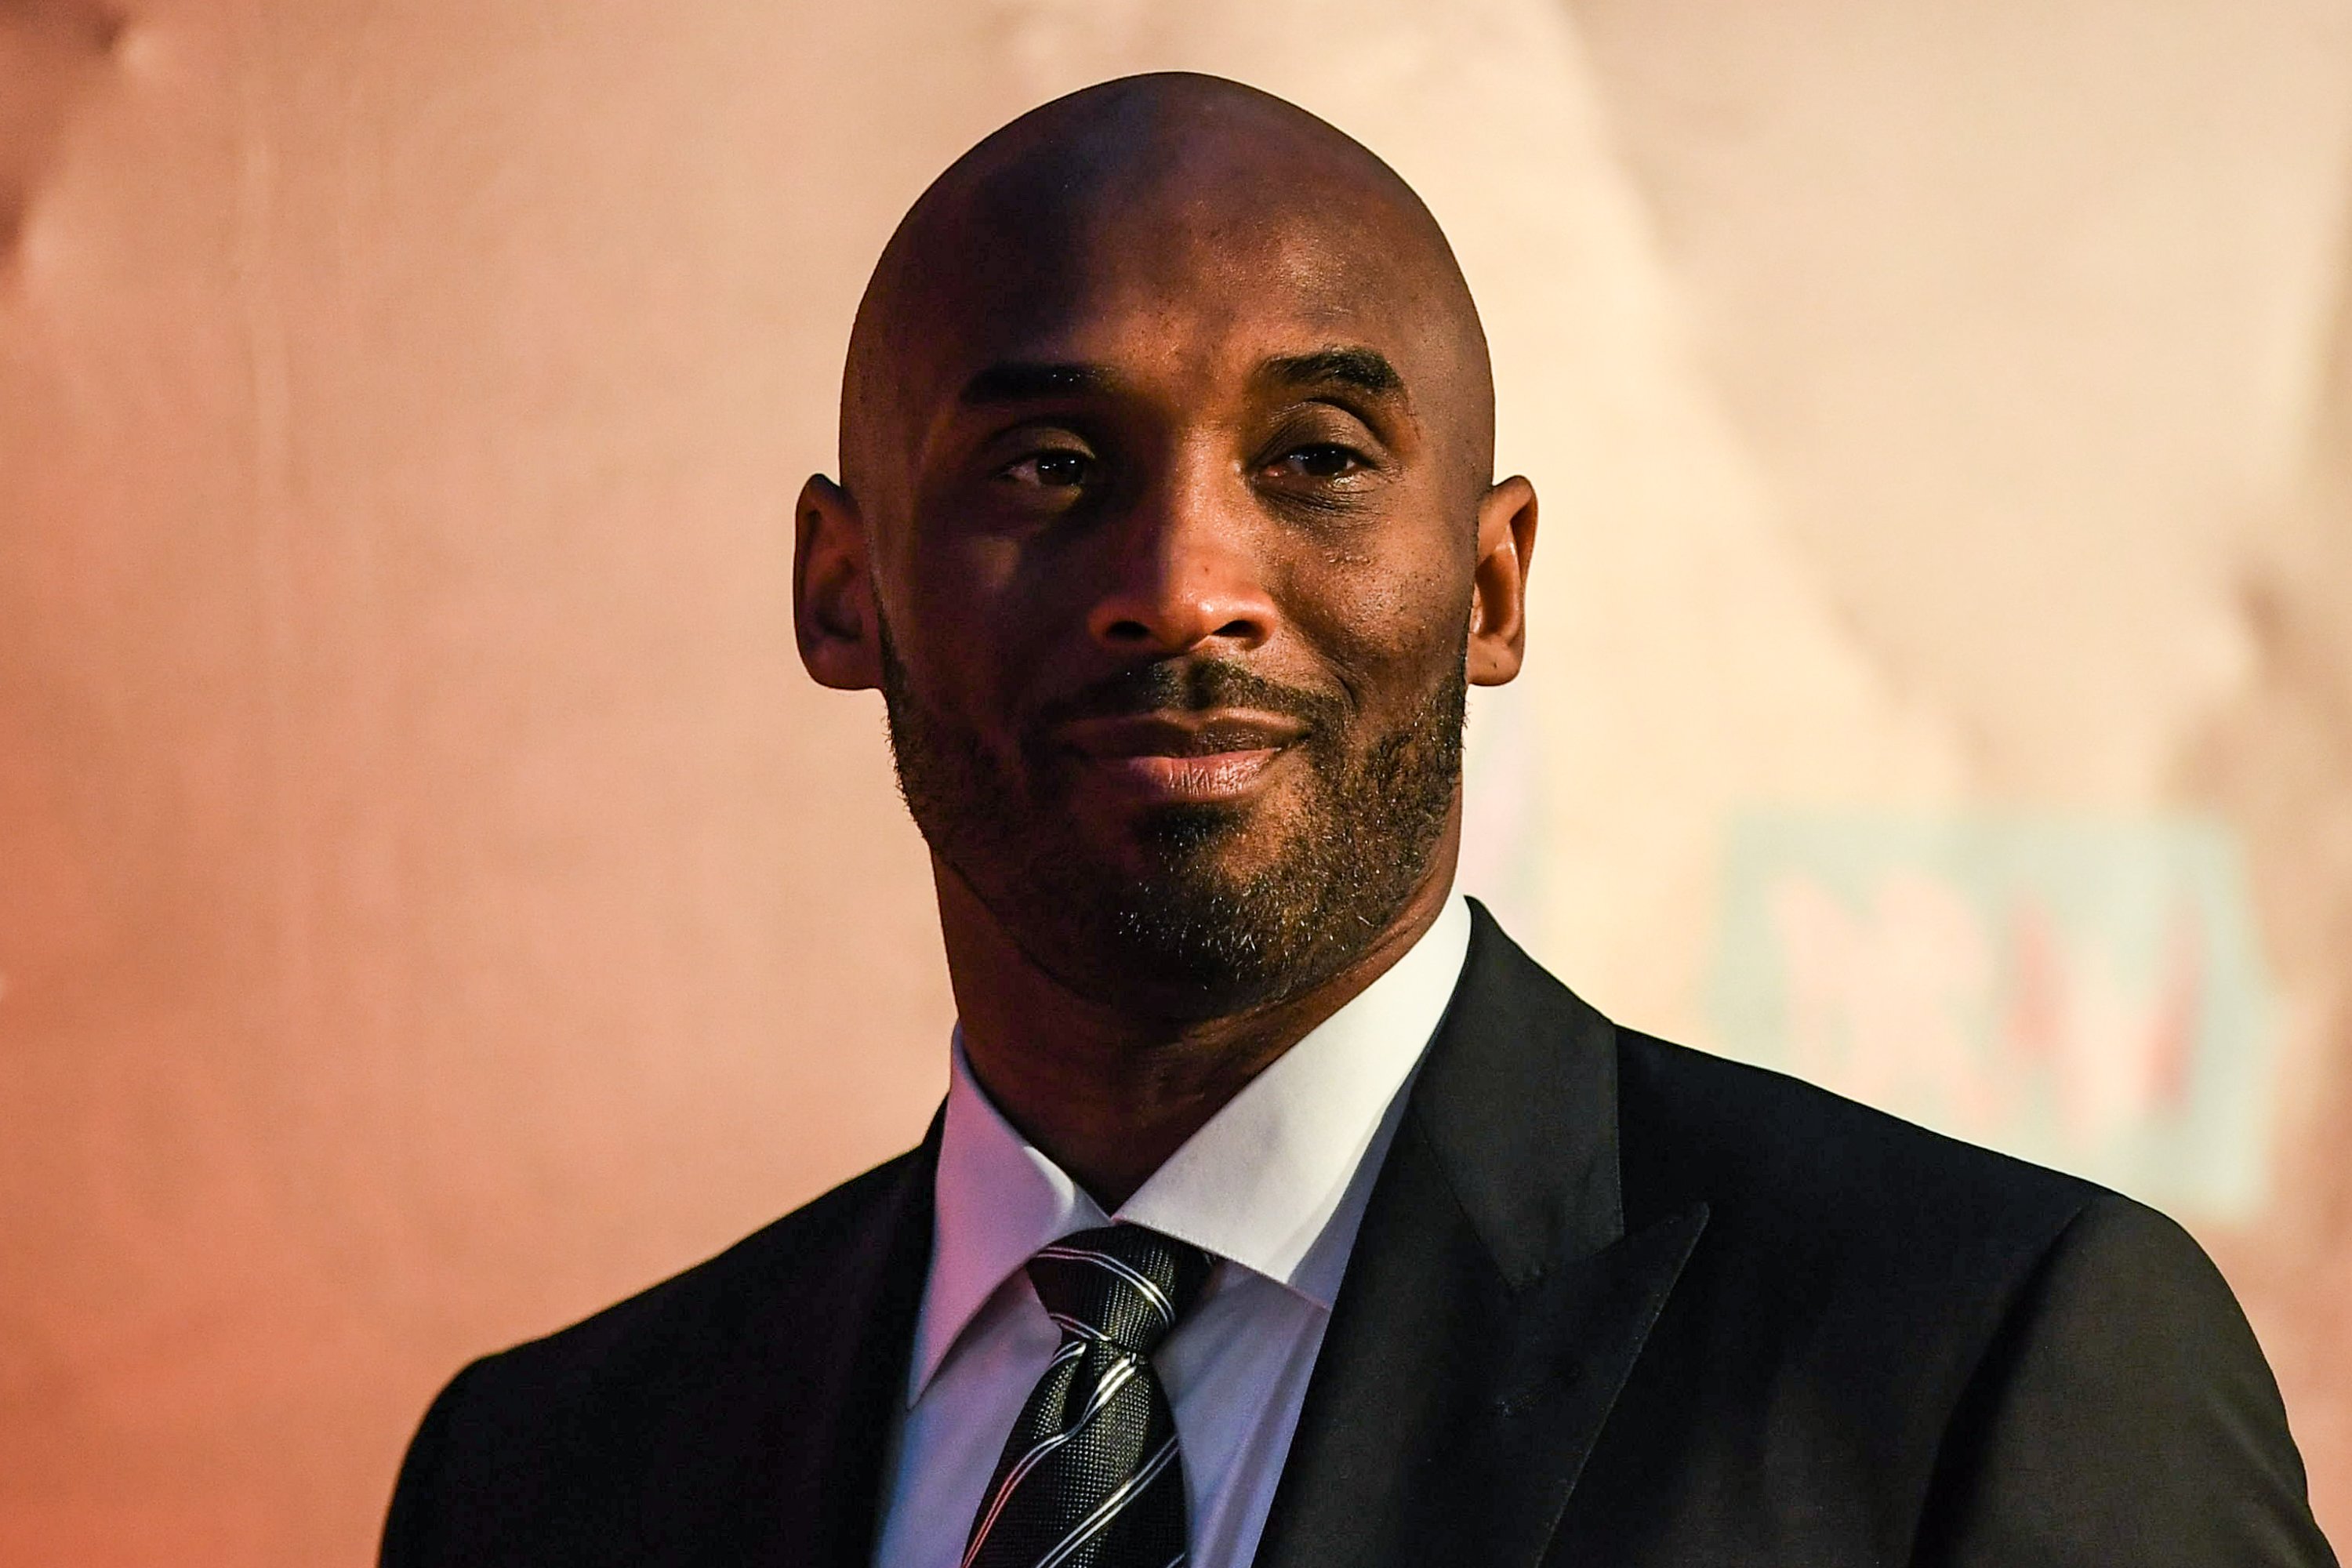 Kobe Bryant during the FIBA Basketball World Cup 2019 Draw Ceremony on March 16, 2019 | Photo: GettyImages